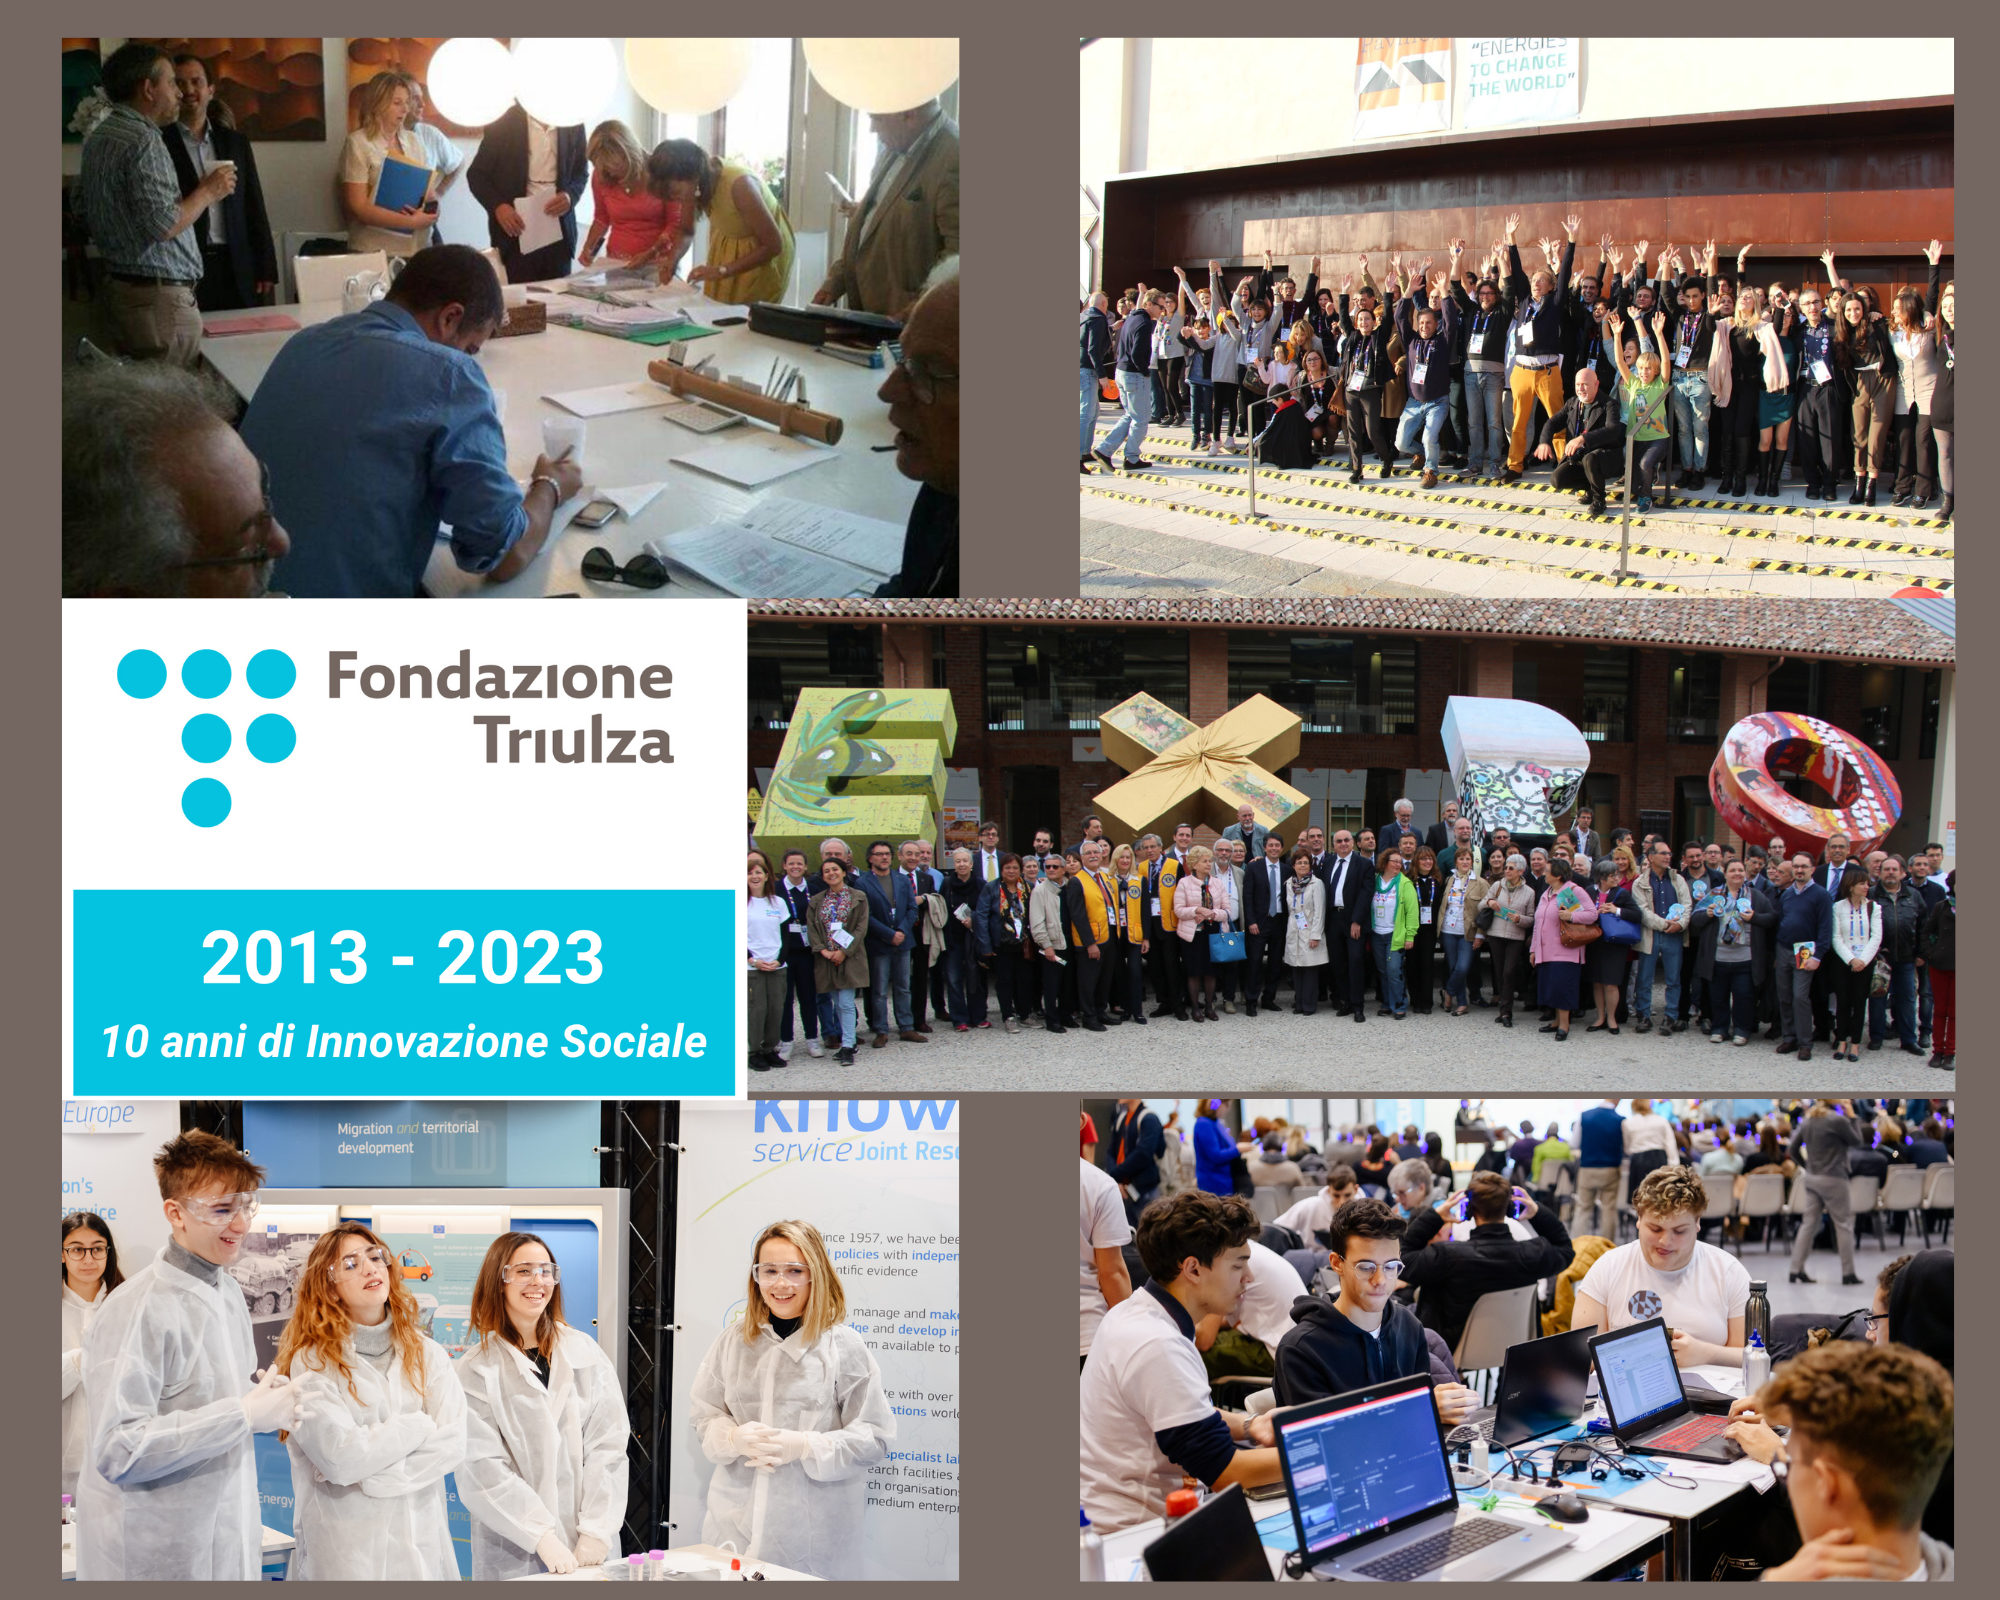 Happy Birthday Fondazione Triulza! From EXPO to MIND, Ten Years of Social Innovation